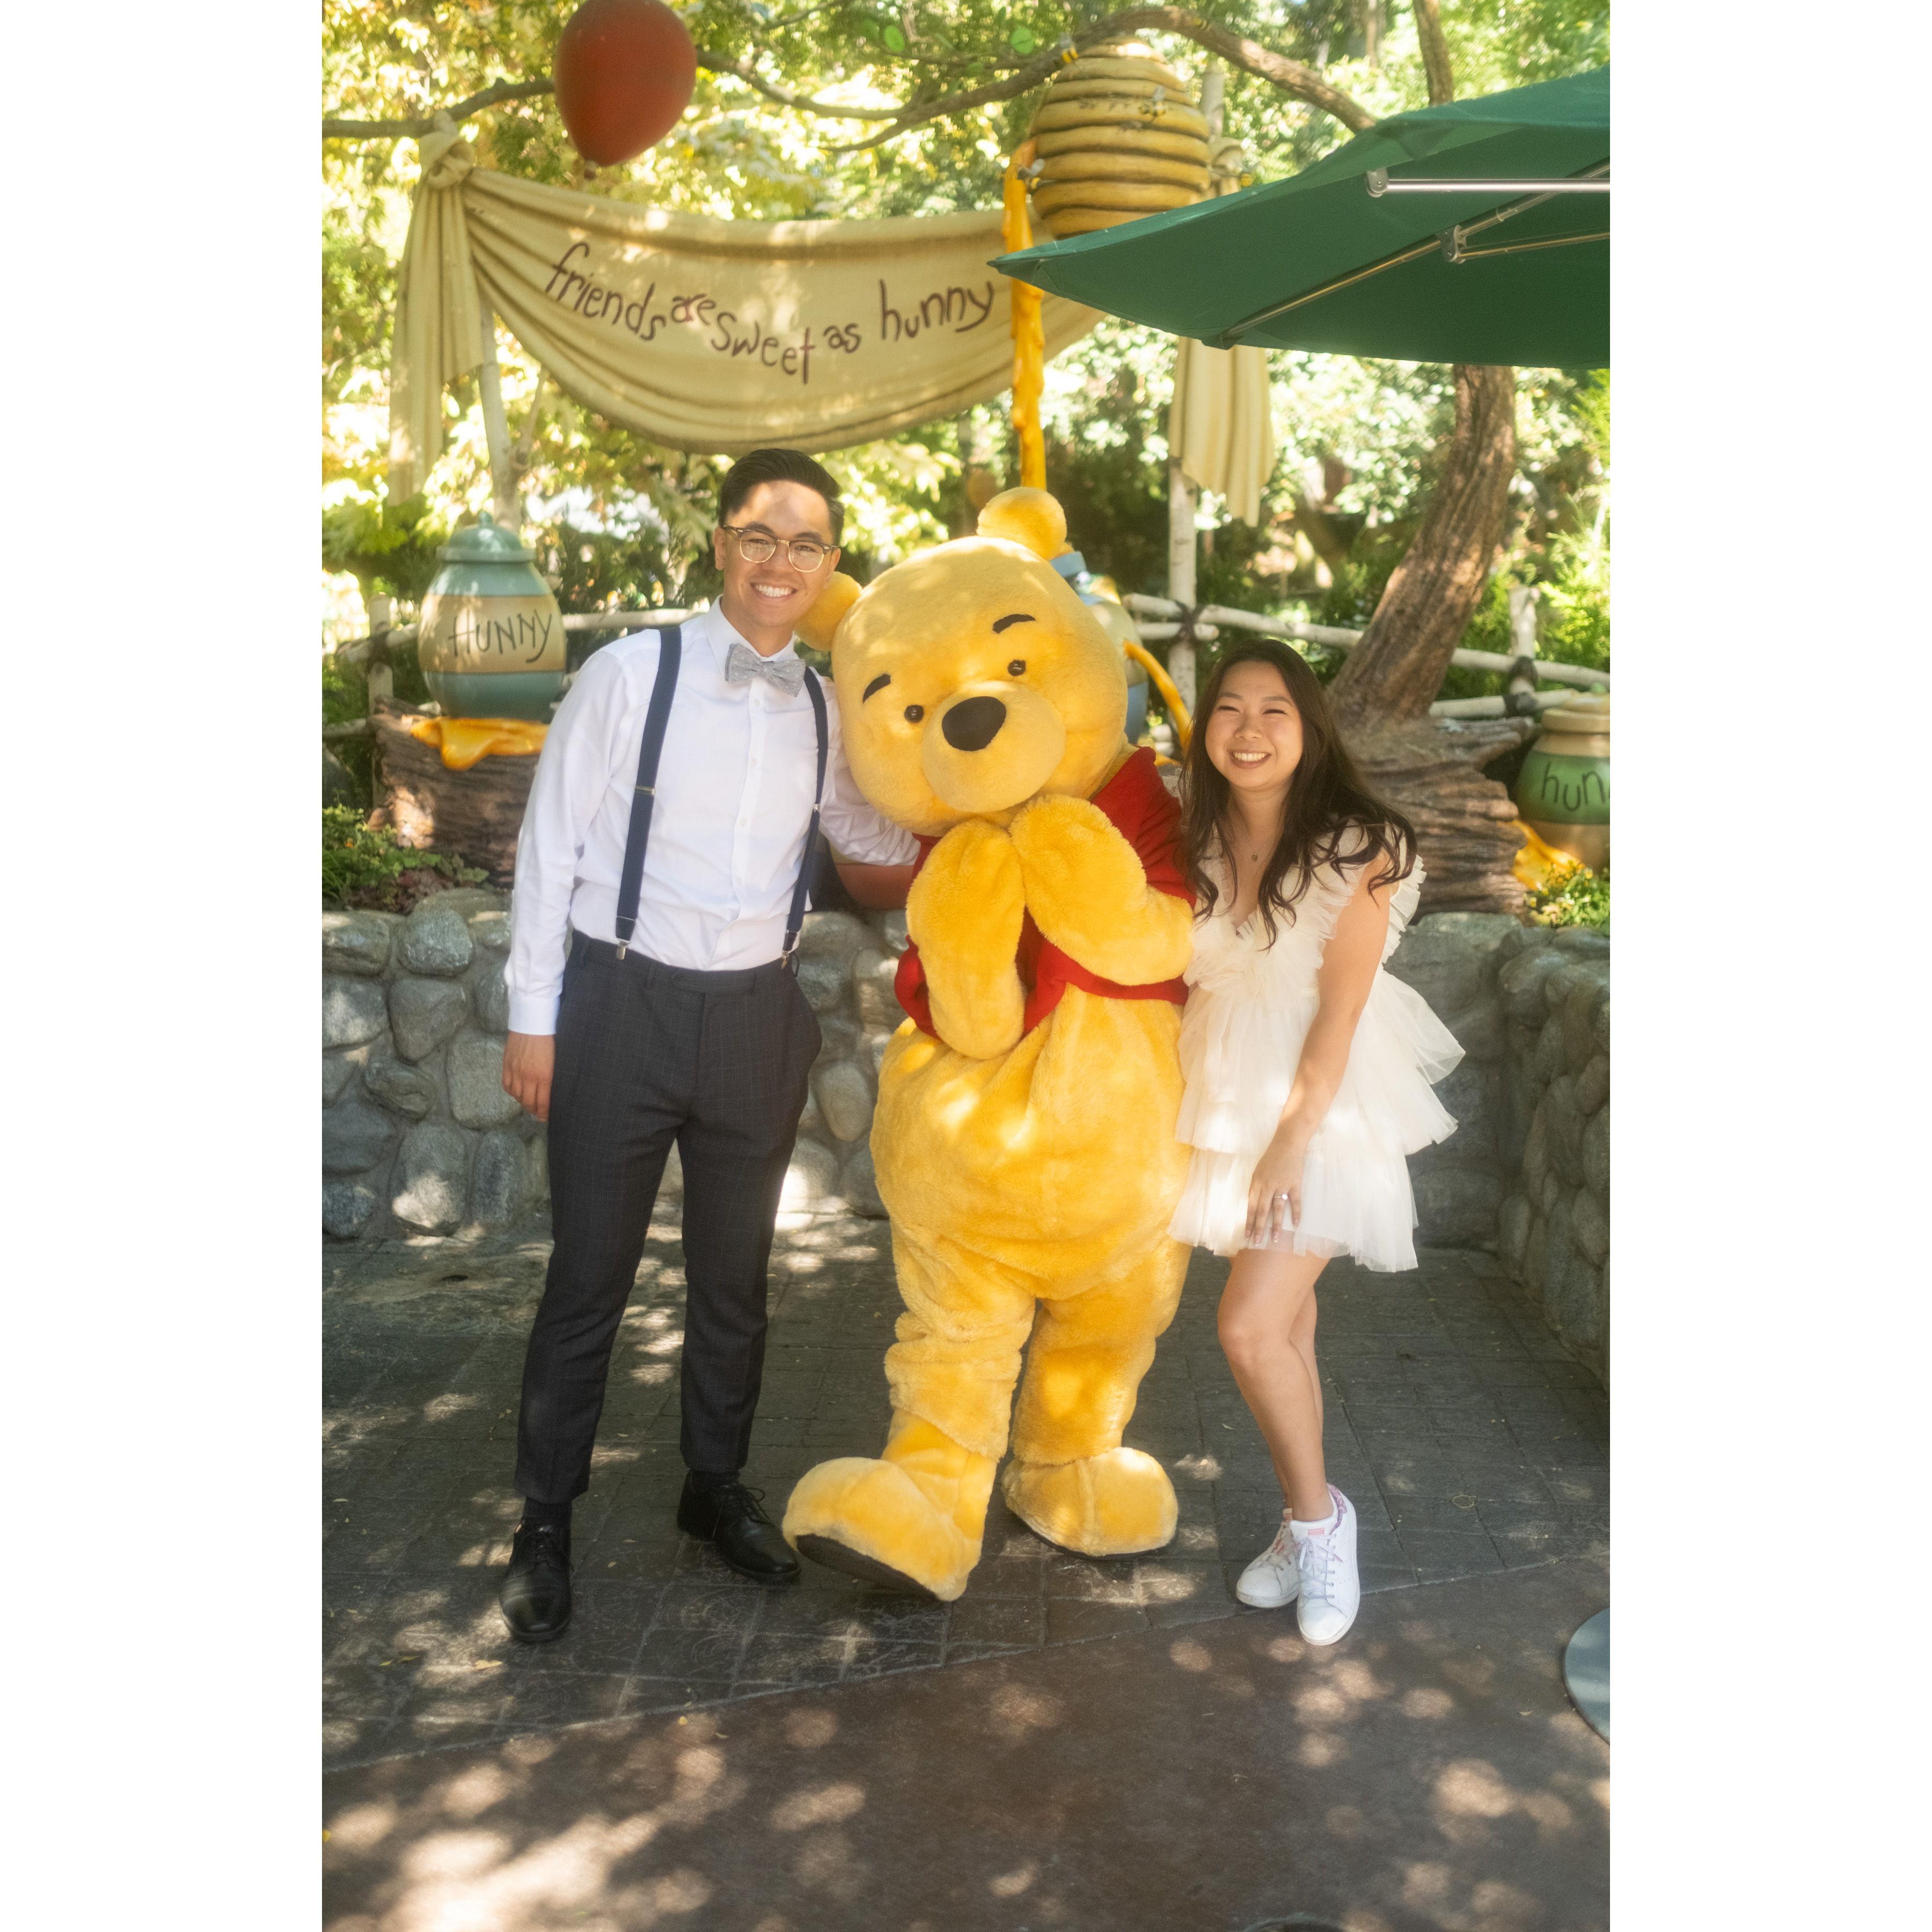 celebrated our engagement news with pooh!